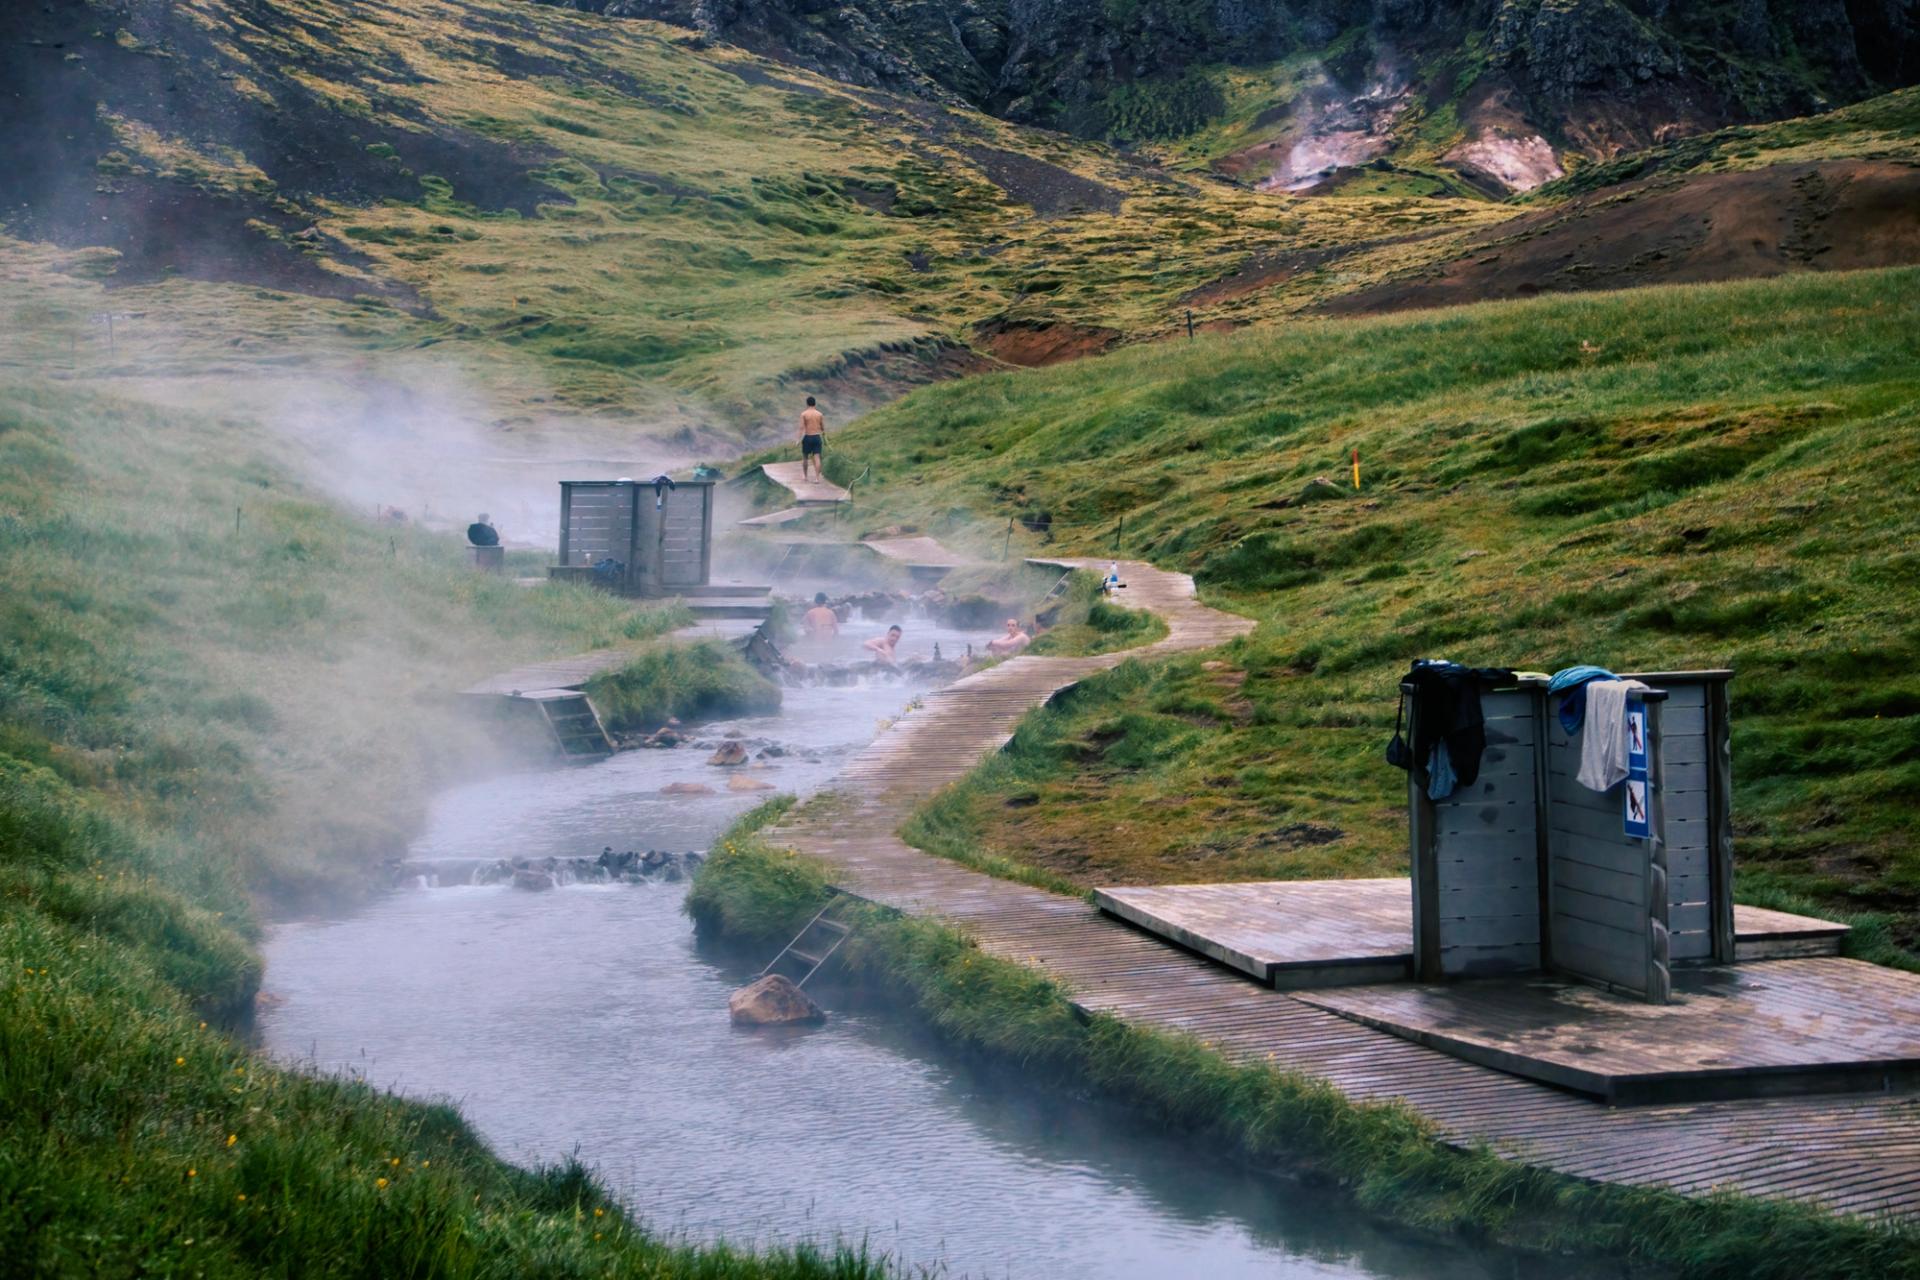 Reykjadalur natural hot springs in Iceland, a steam valley with perfect temperature geothermal water